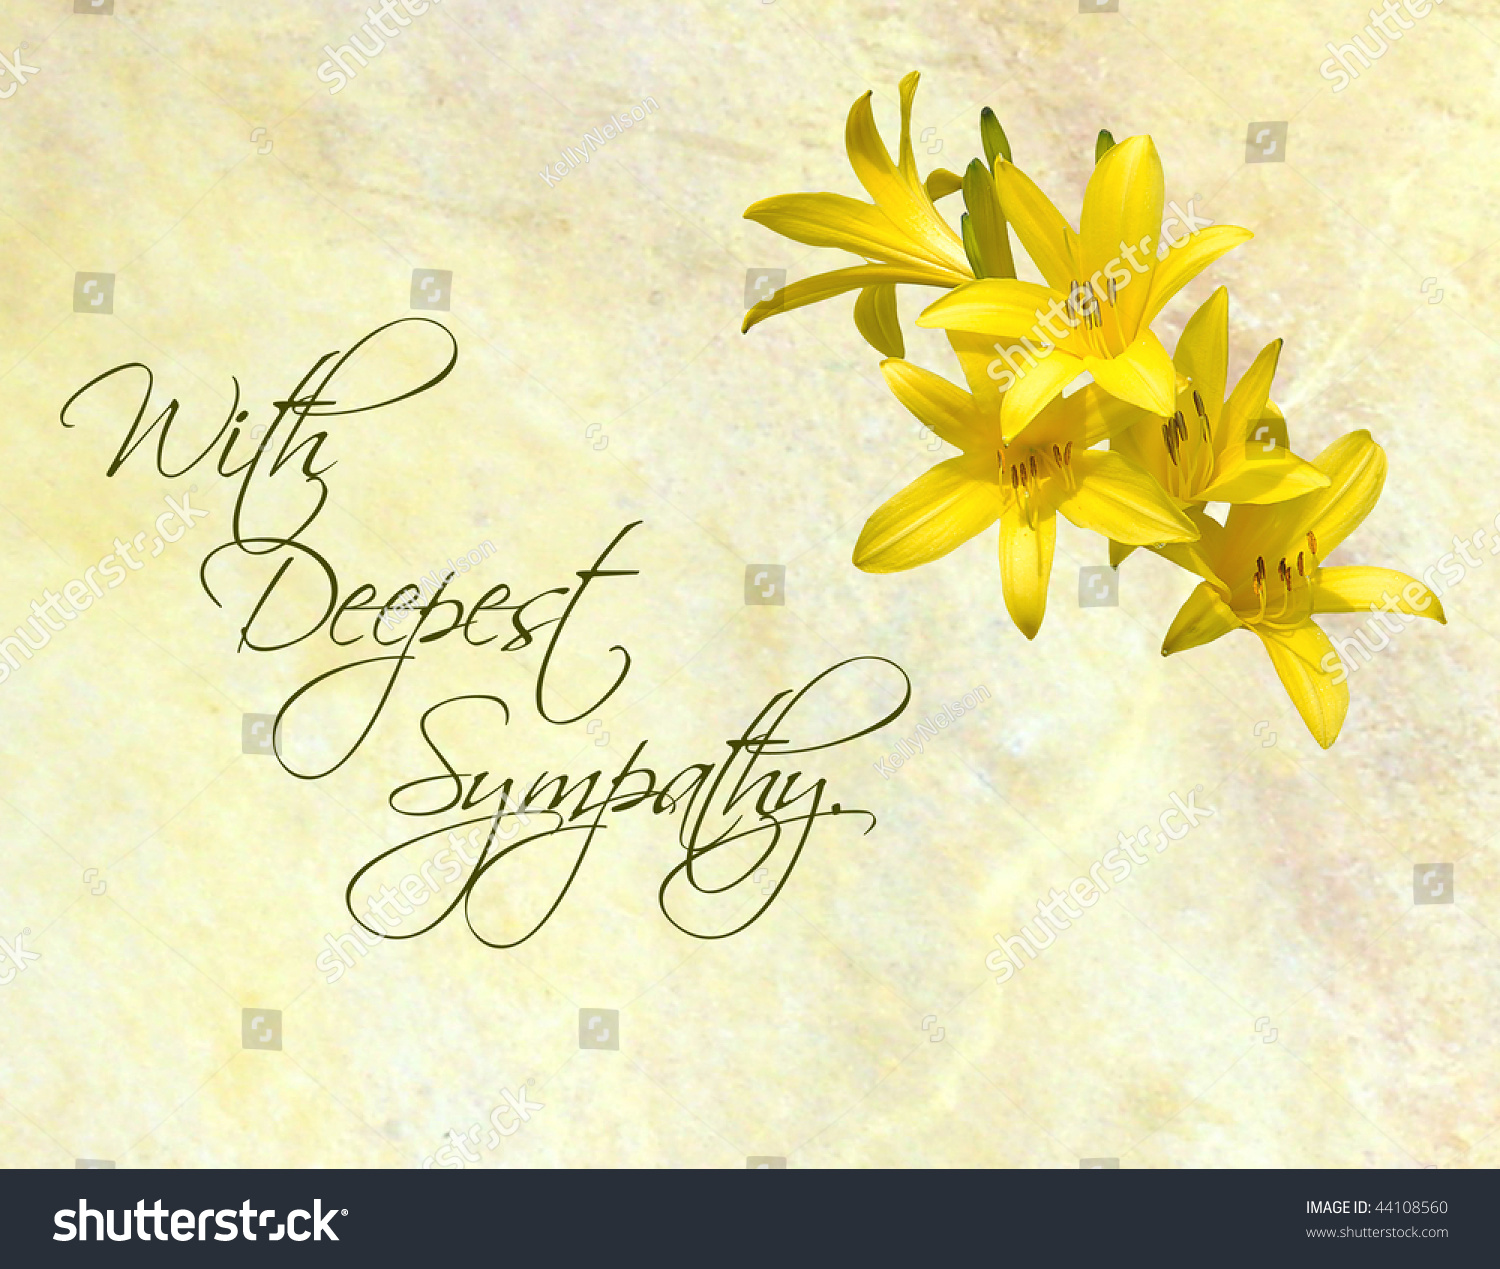 15++ Sympathy card background images ideas in 2021 